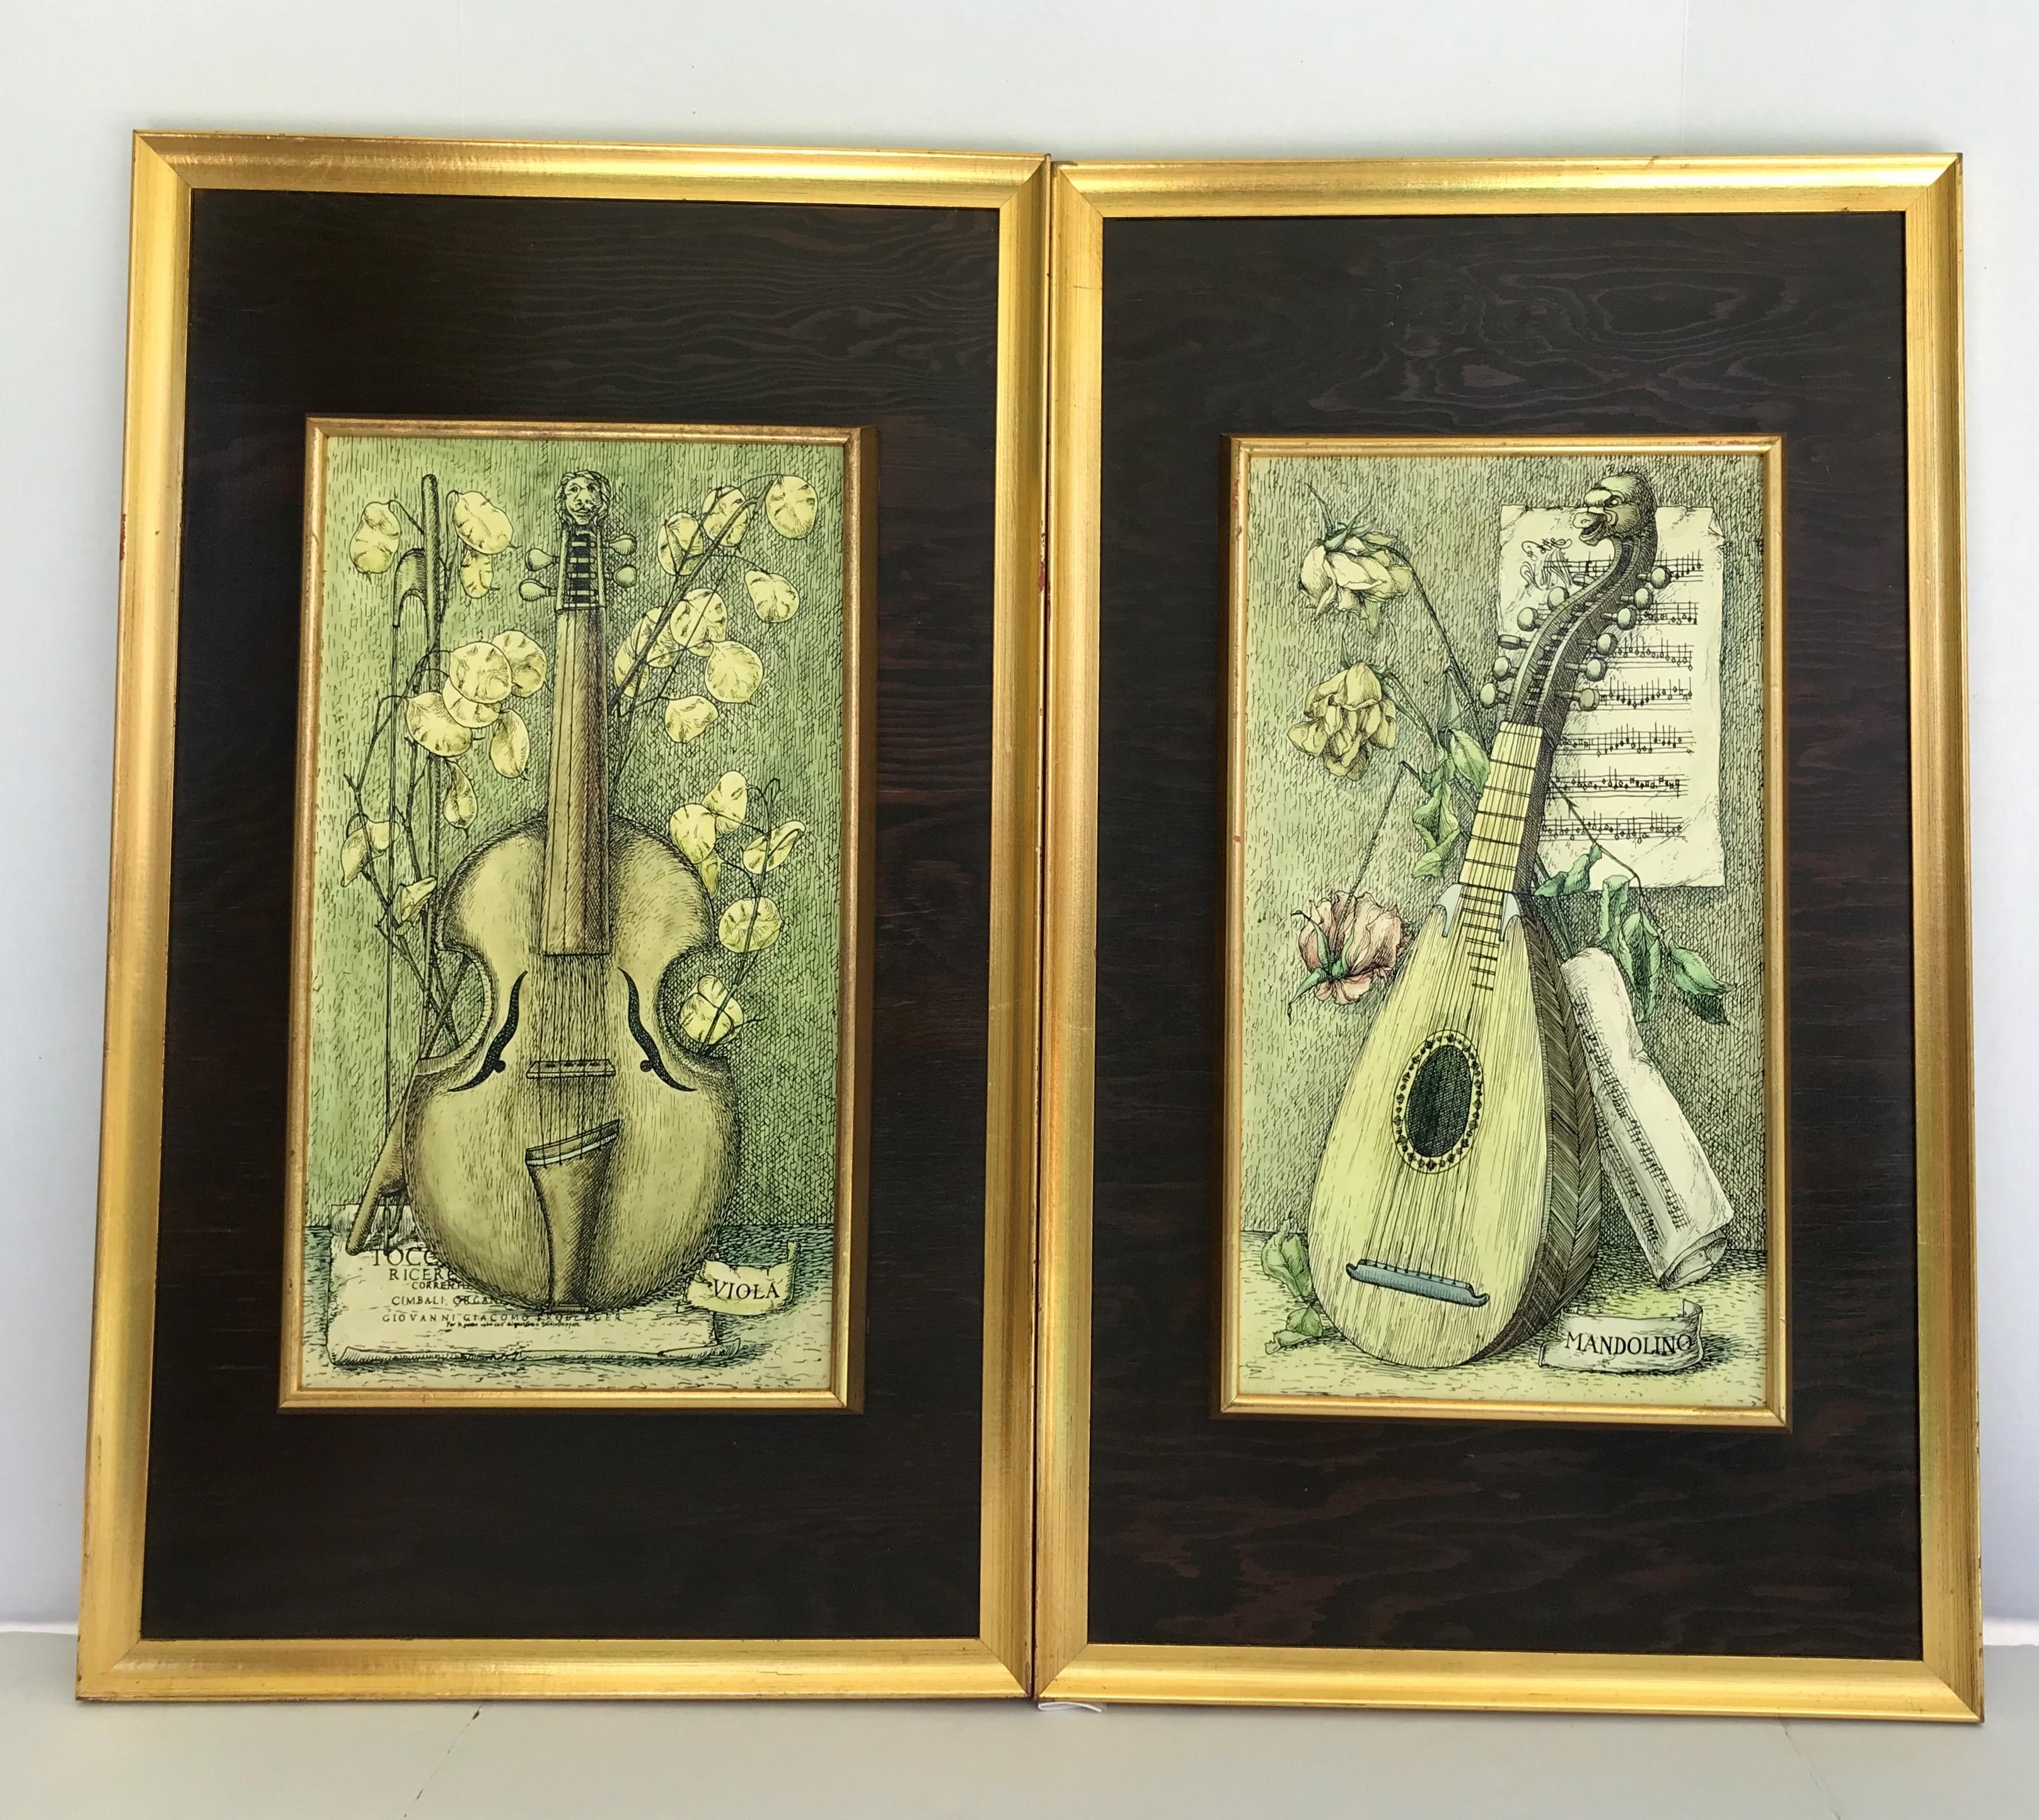 Piero Fornasetti Style Italian still life panels depicting string instruments, a viola and a mandolin(o).  Made by Felice Galbiati Arte Decorativa in Milan.  A lacquered lithographic transfer on wood, framed and centered on a larger framed dark wood